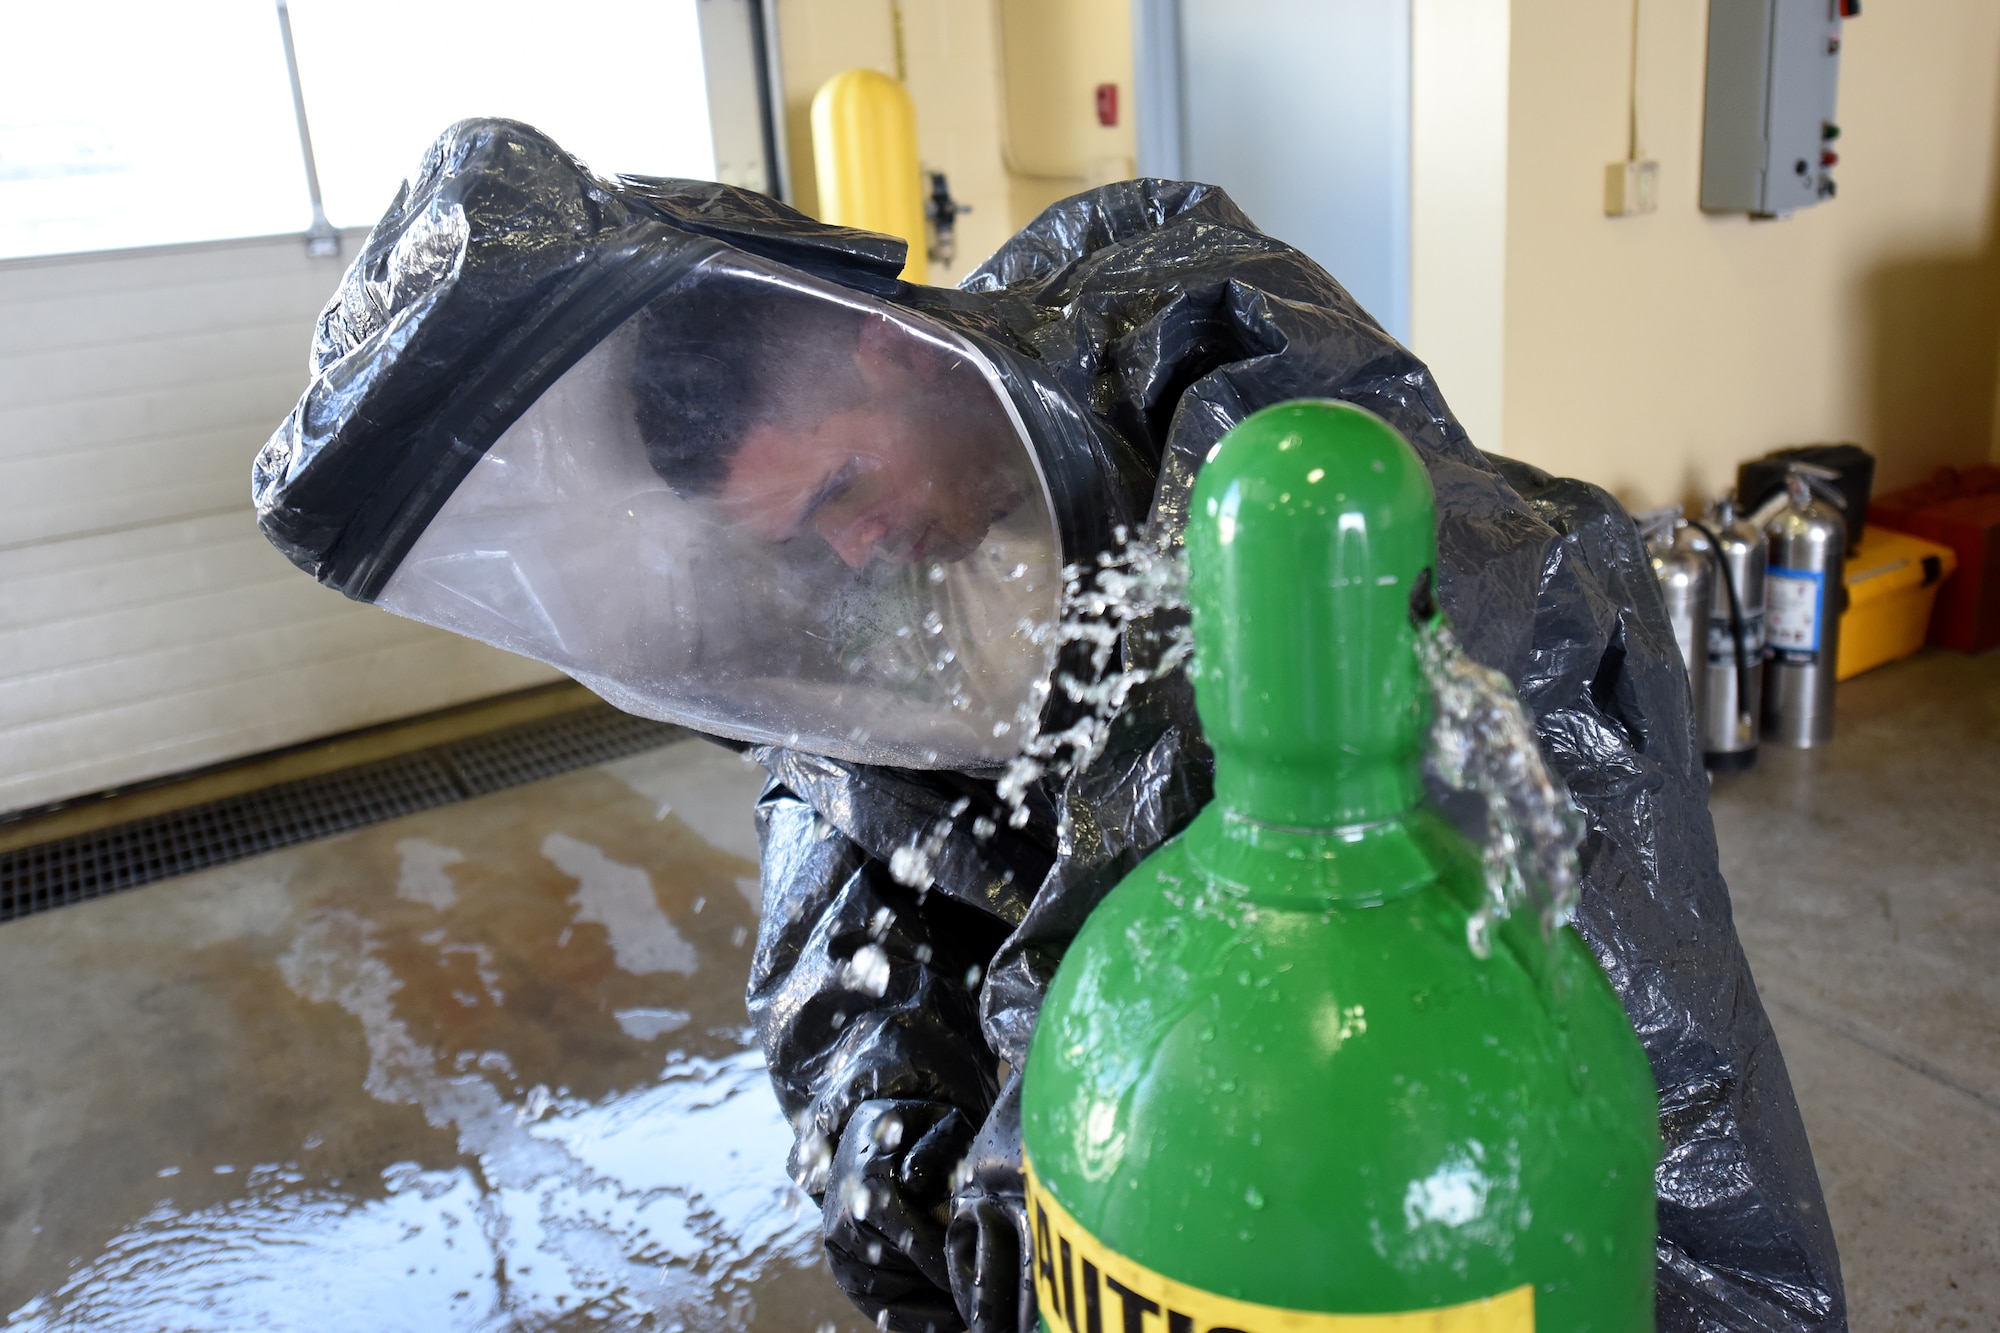 Senior Airman Hector Guemarezcolon, 341st Civil Engineer Squadron firefighter, practices stopping a leaking chlorine cylinder while wearing a level A hazardous materials protective suit April 22, 2015, at Malmstrom Air Force Base, Mont. The Malmstrom Fire Emergency Services Flight provides an all-hazards emergency response capability, along with command and control for the base. (U.S. Air Force photo/Chris Willis)